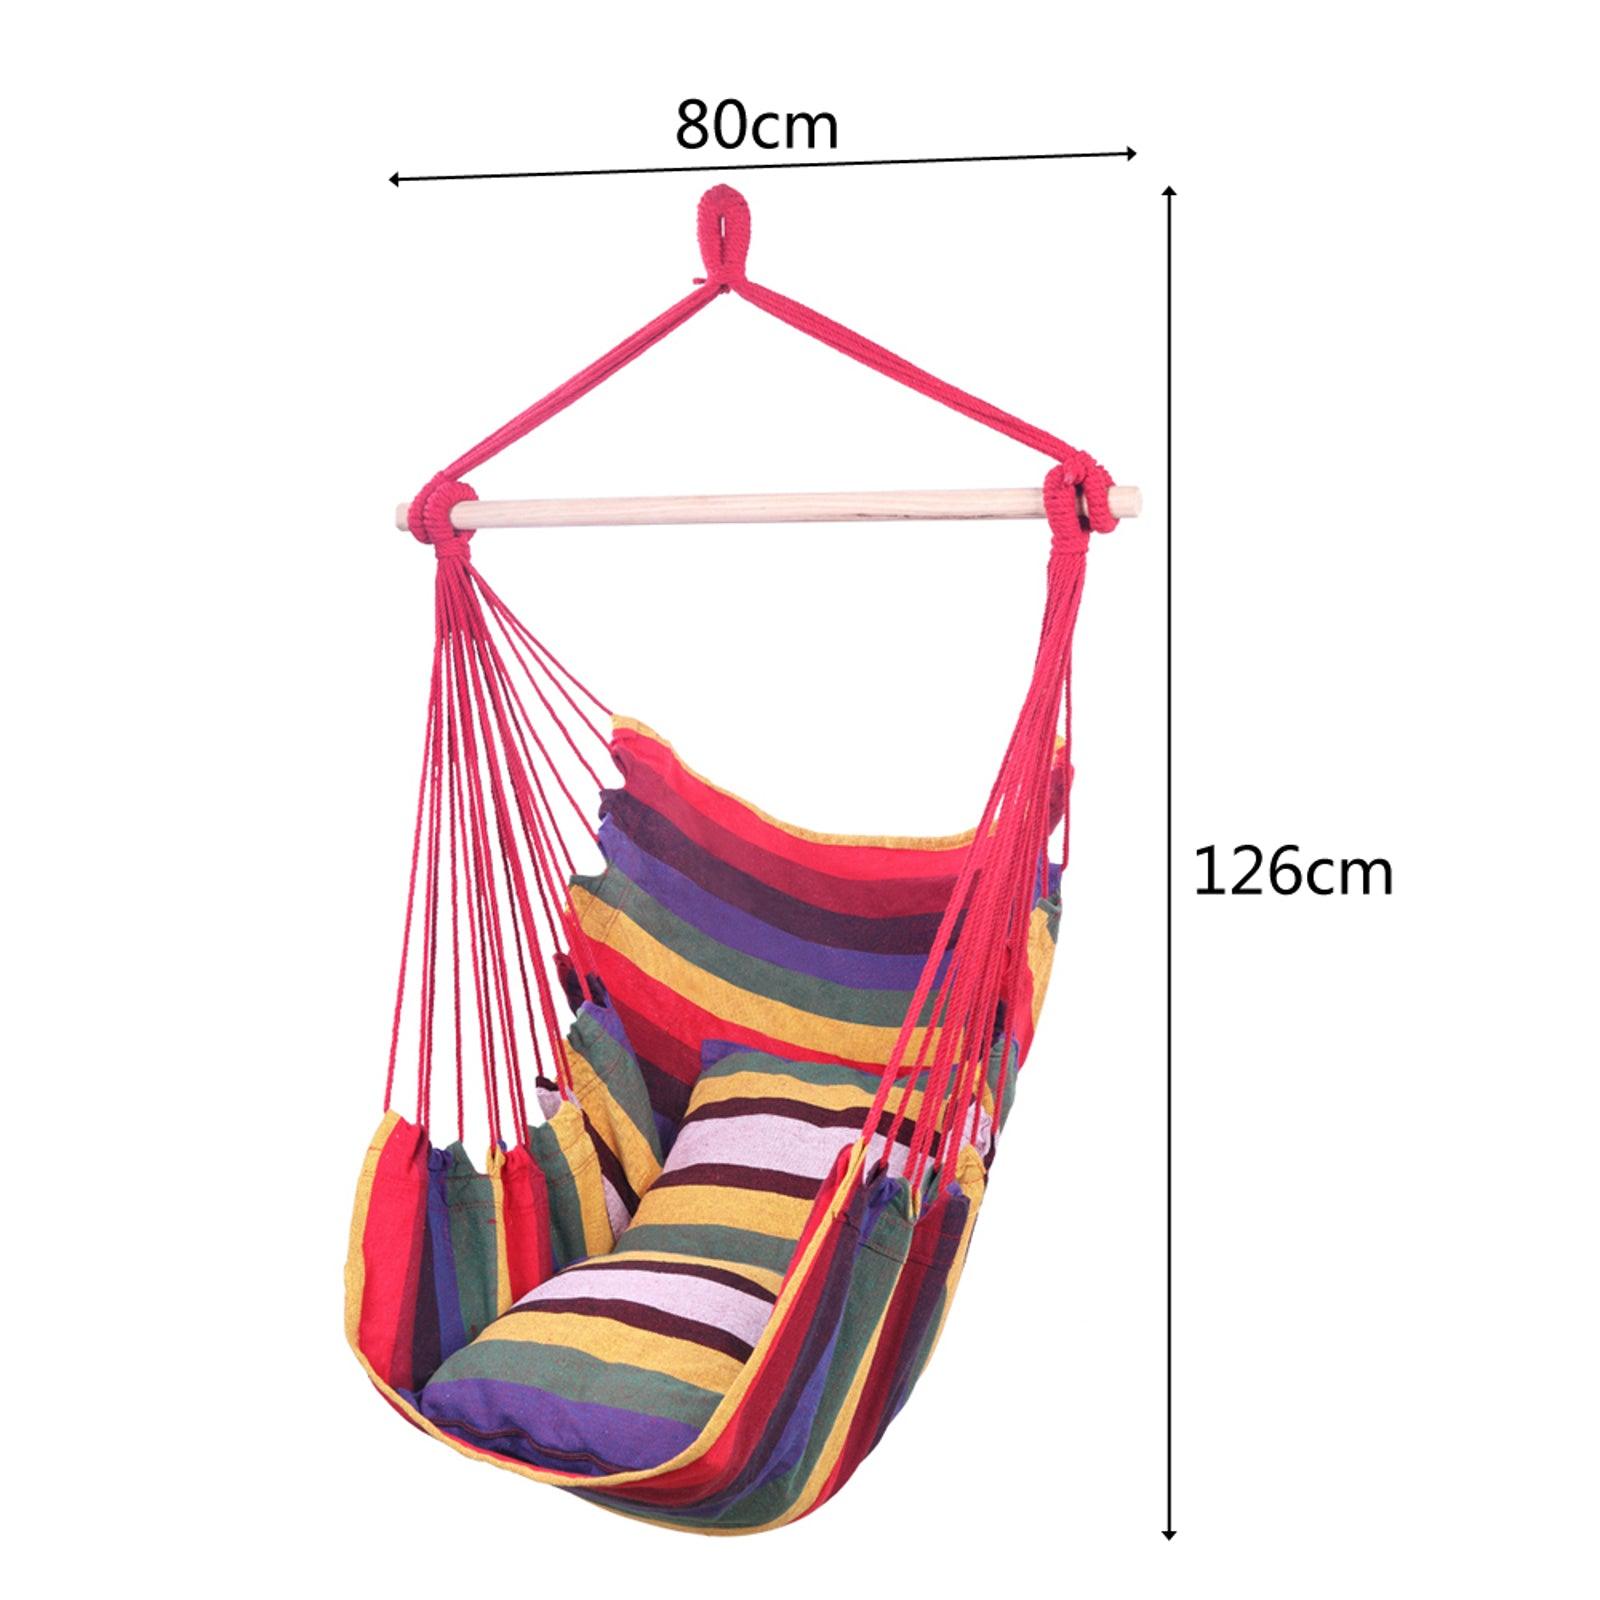 Hanging Chair / Hammock Swing Chair / Canvas Cotton Rope with Pillows (Rainbow) - Charming Spaces